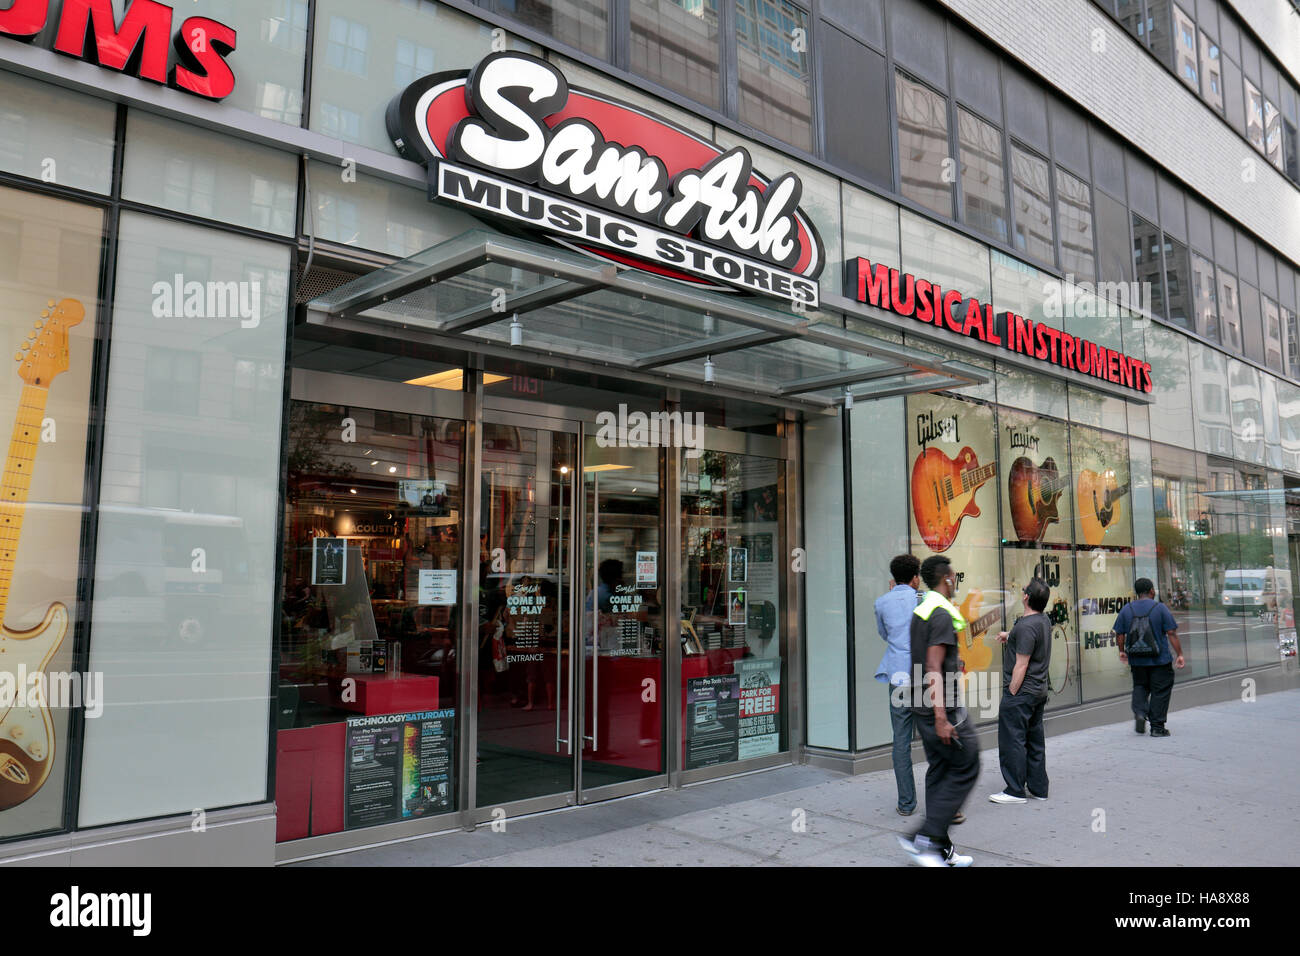 The Sam Ash Music Stores musical instruments store, 333 W. 34th Street, Manhattan, New York City, United States. Stock Photo